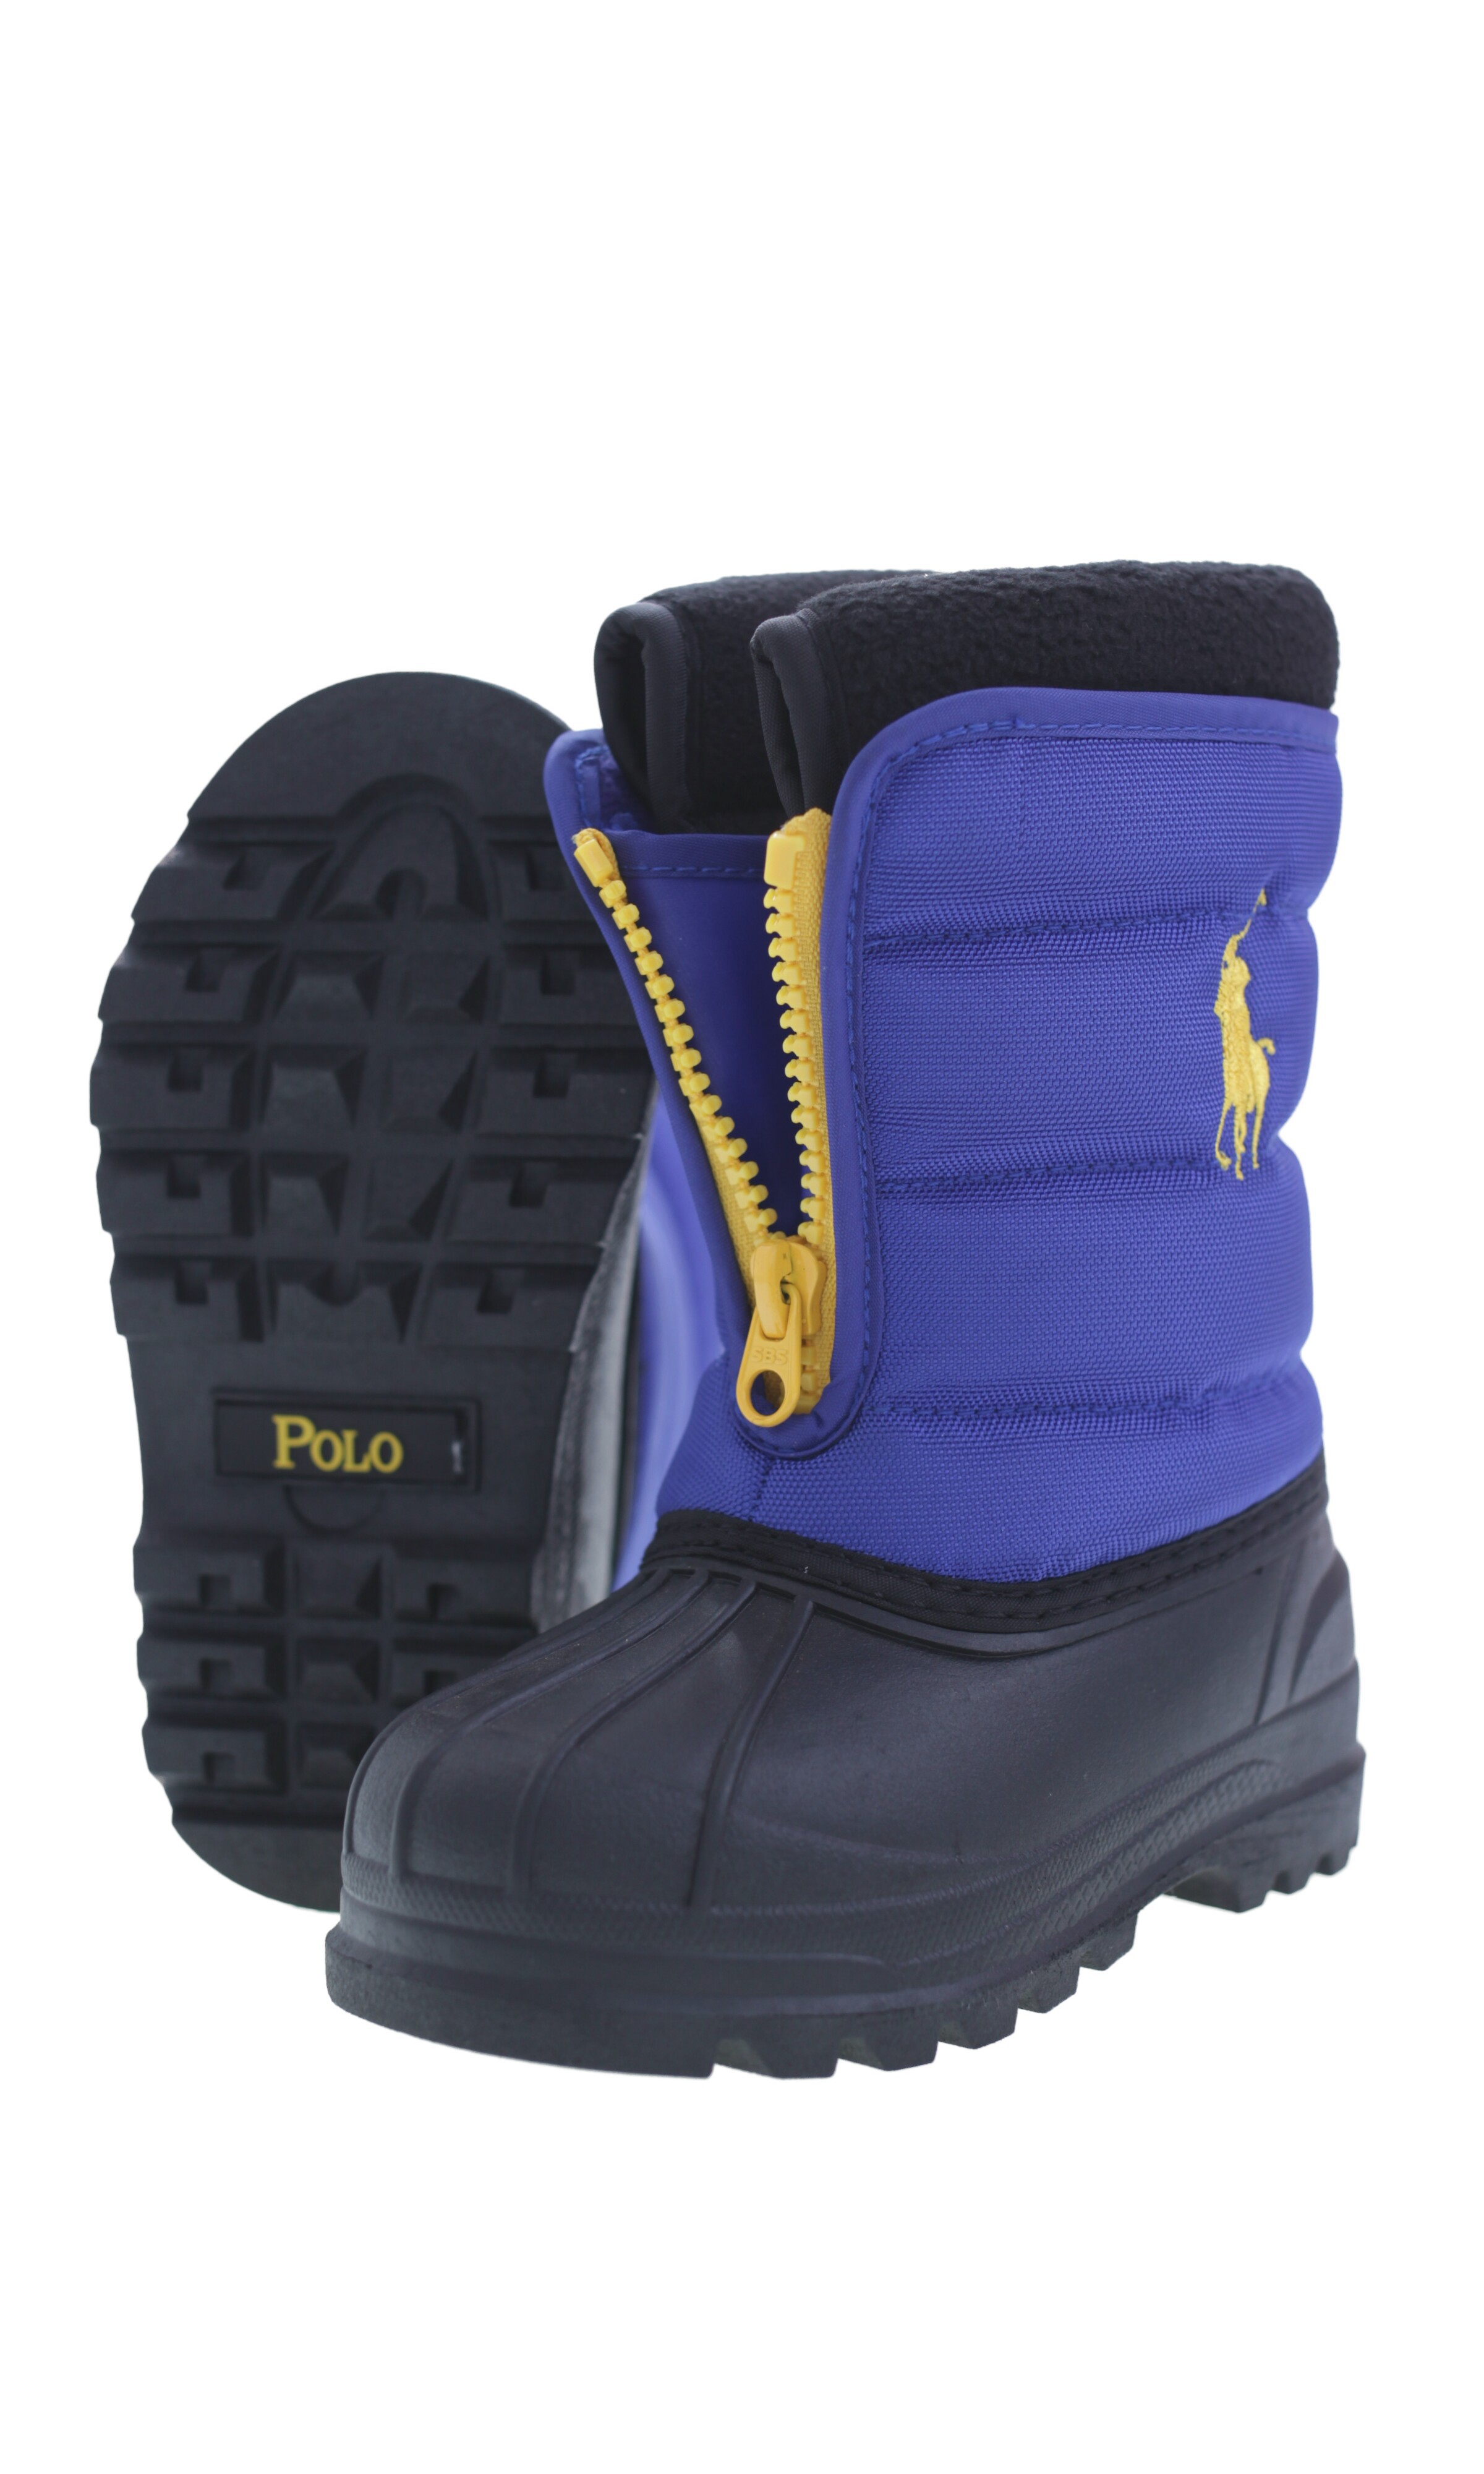 polo boots navy blue